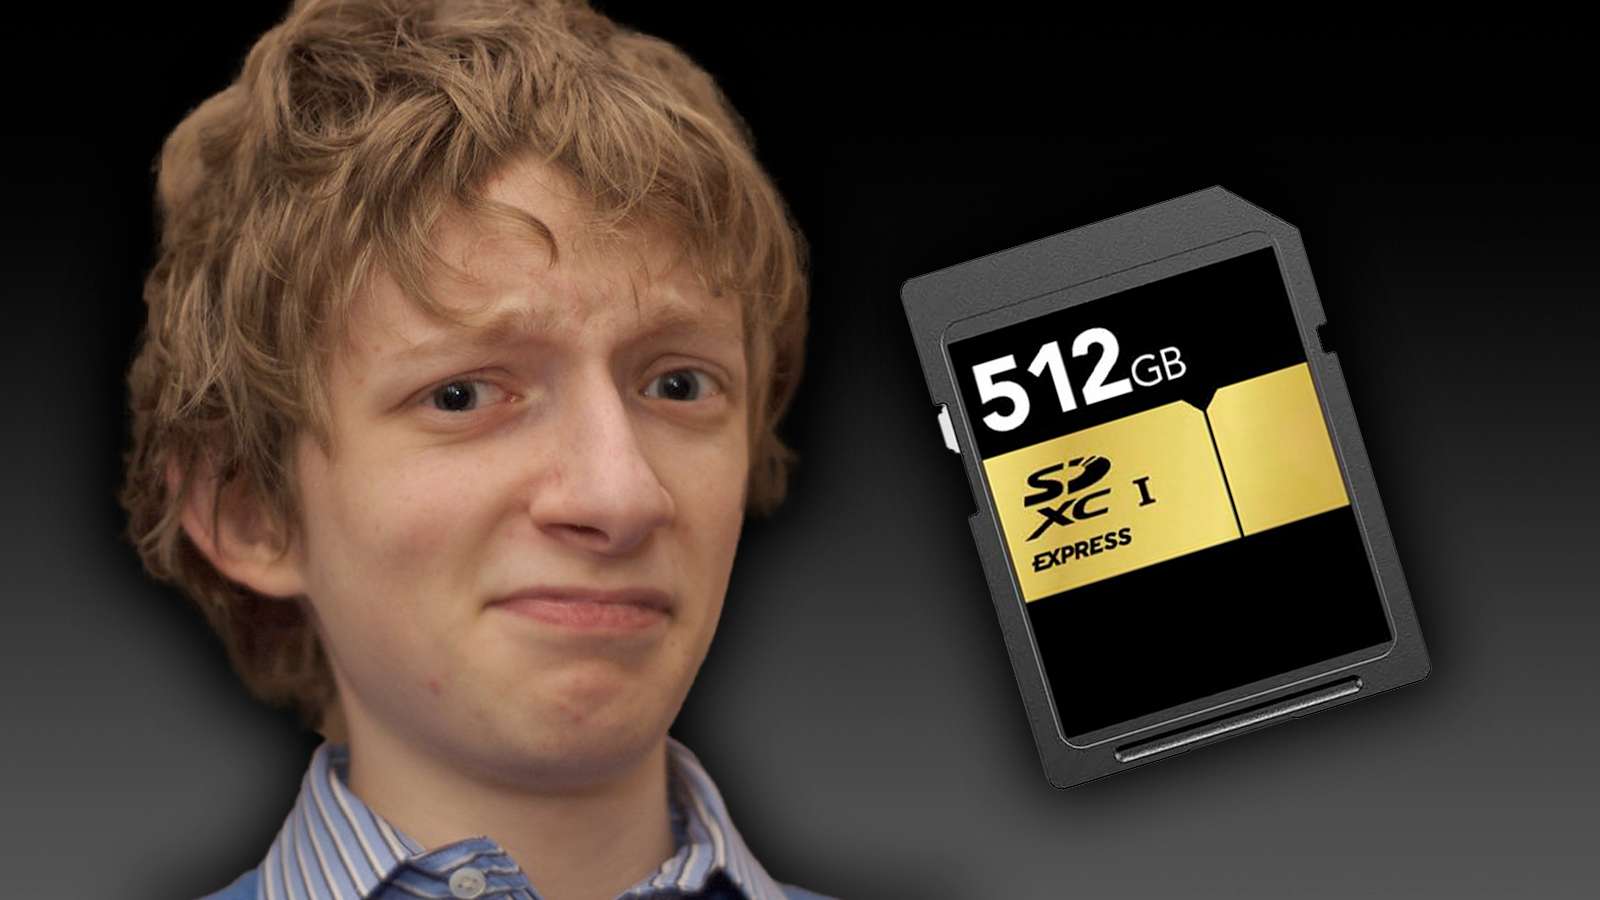 microsd express card represented by a large sd card with a confused boy next to it